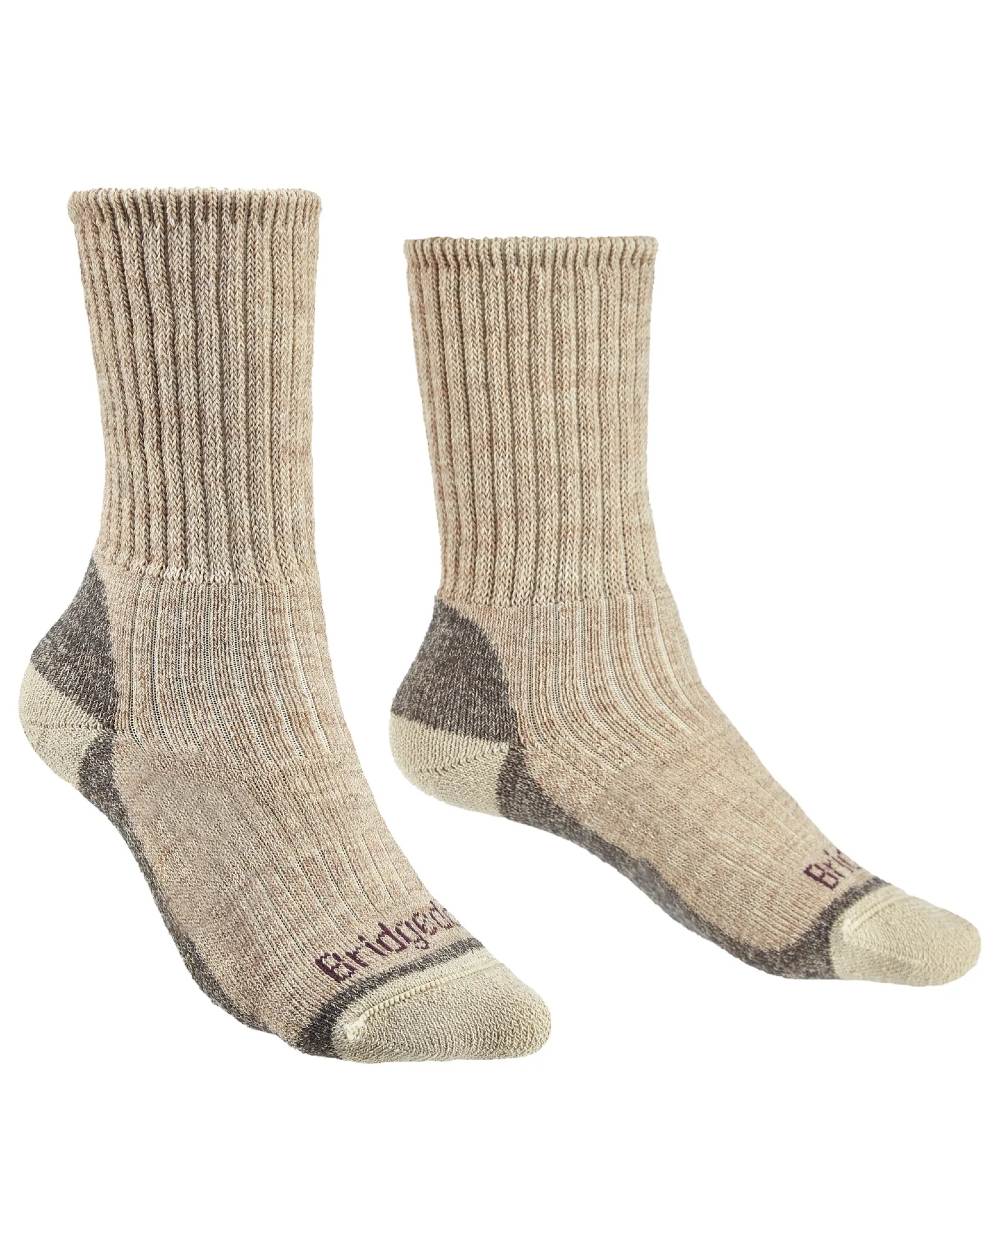 Natural coloured Bridgedale Womens Midweight Merino Comfort Boot Socks on white background 